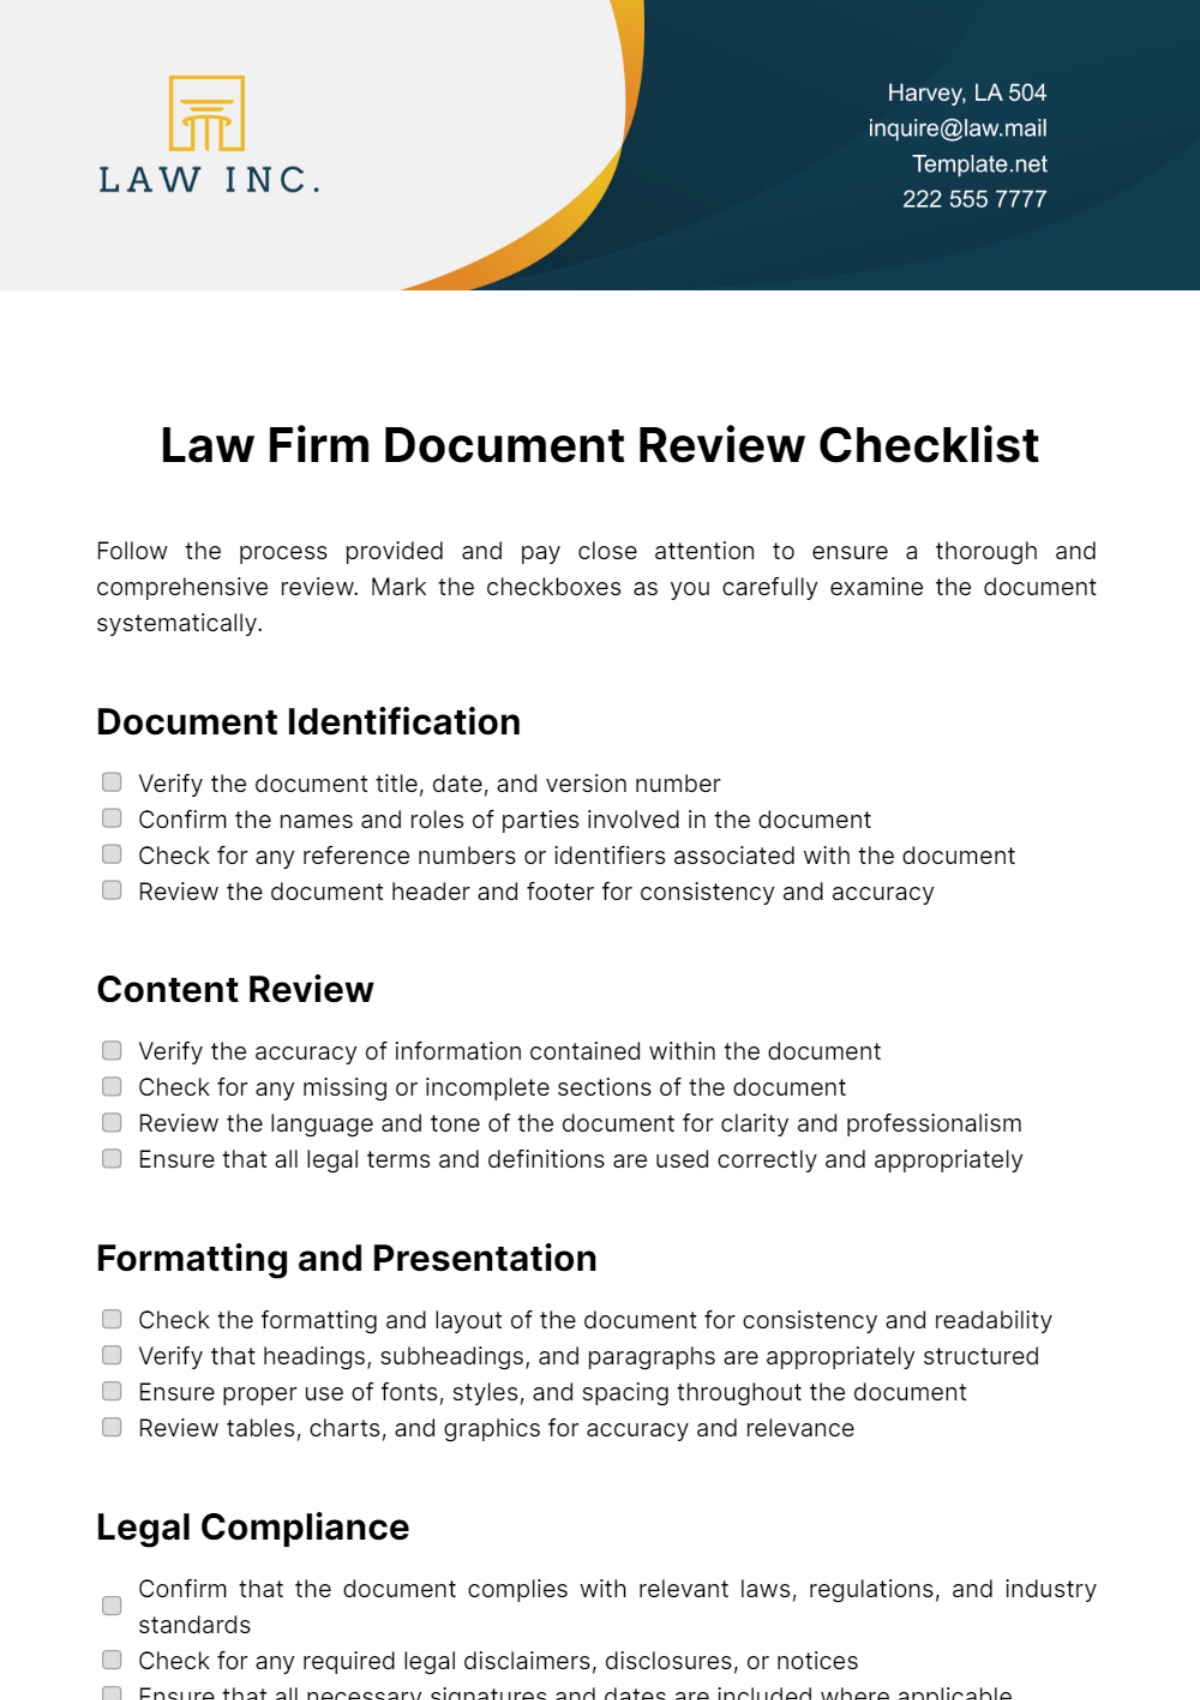 Law Firm Document Review Checklist Template